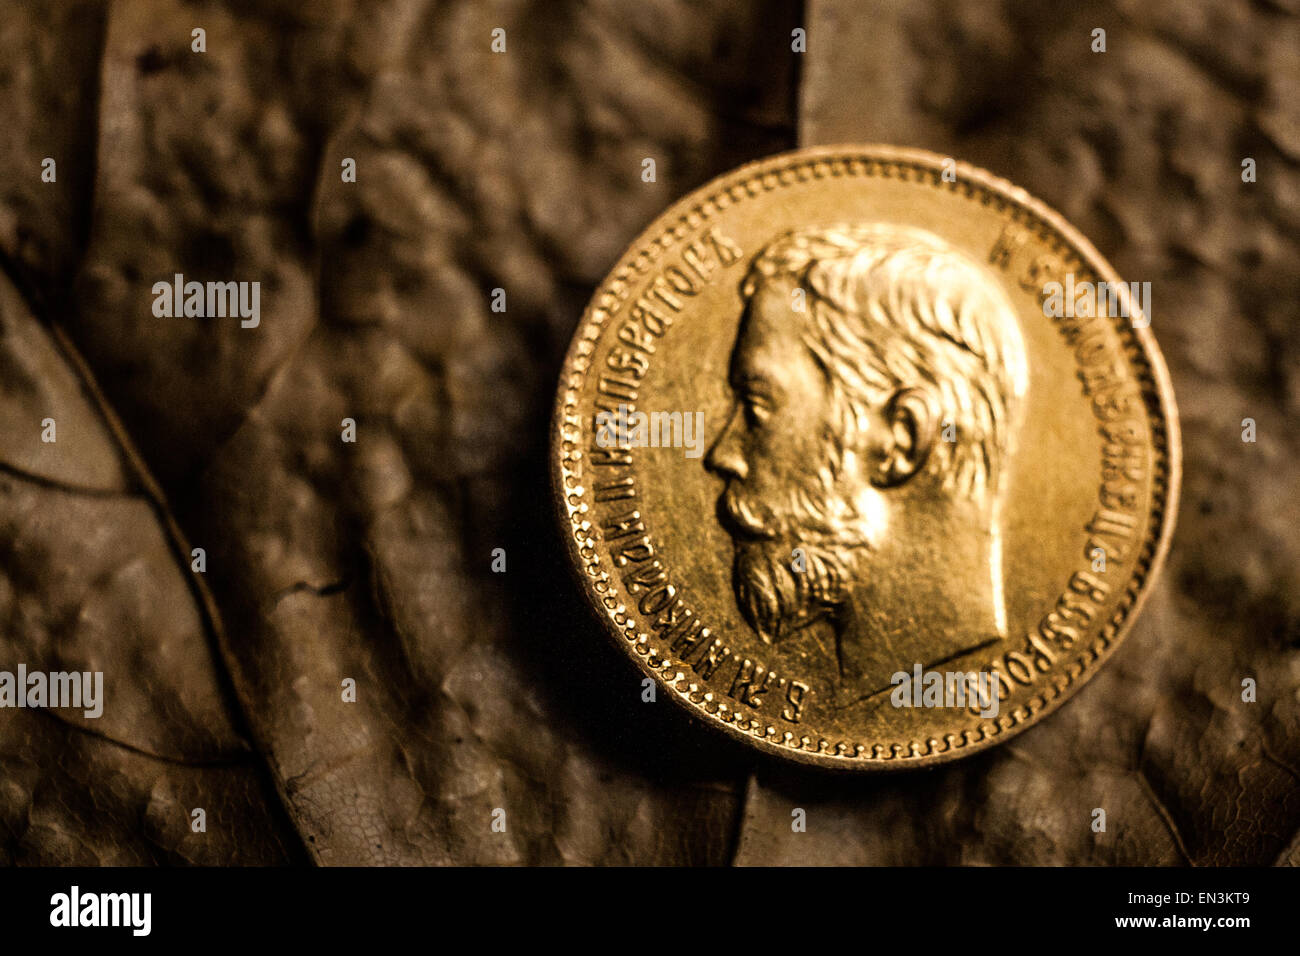 gold coin of five rubles with a portrait of Nikolay II the last emperor of Russia Stock Photo